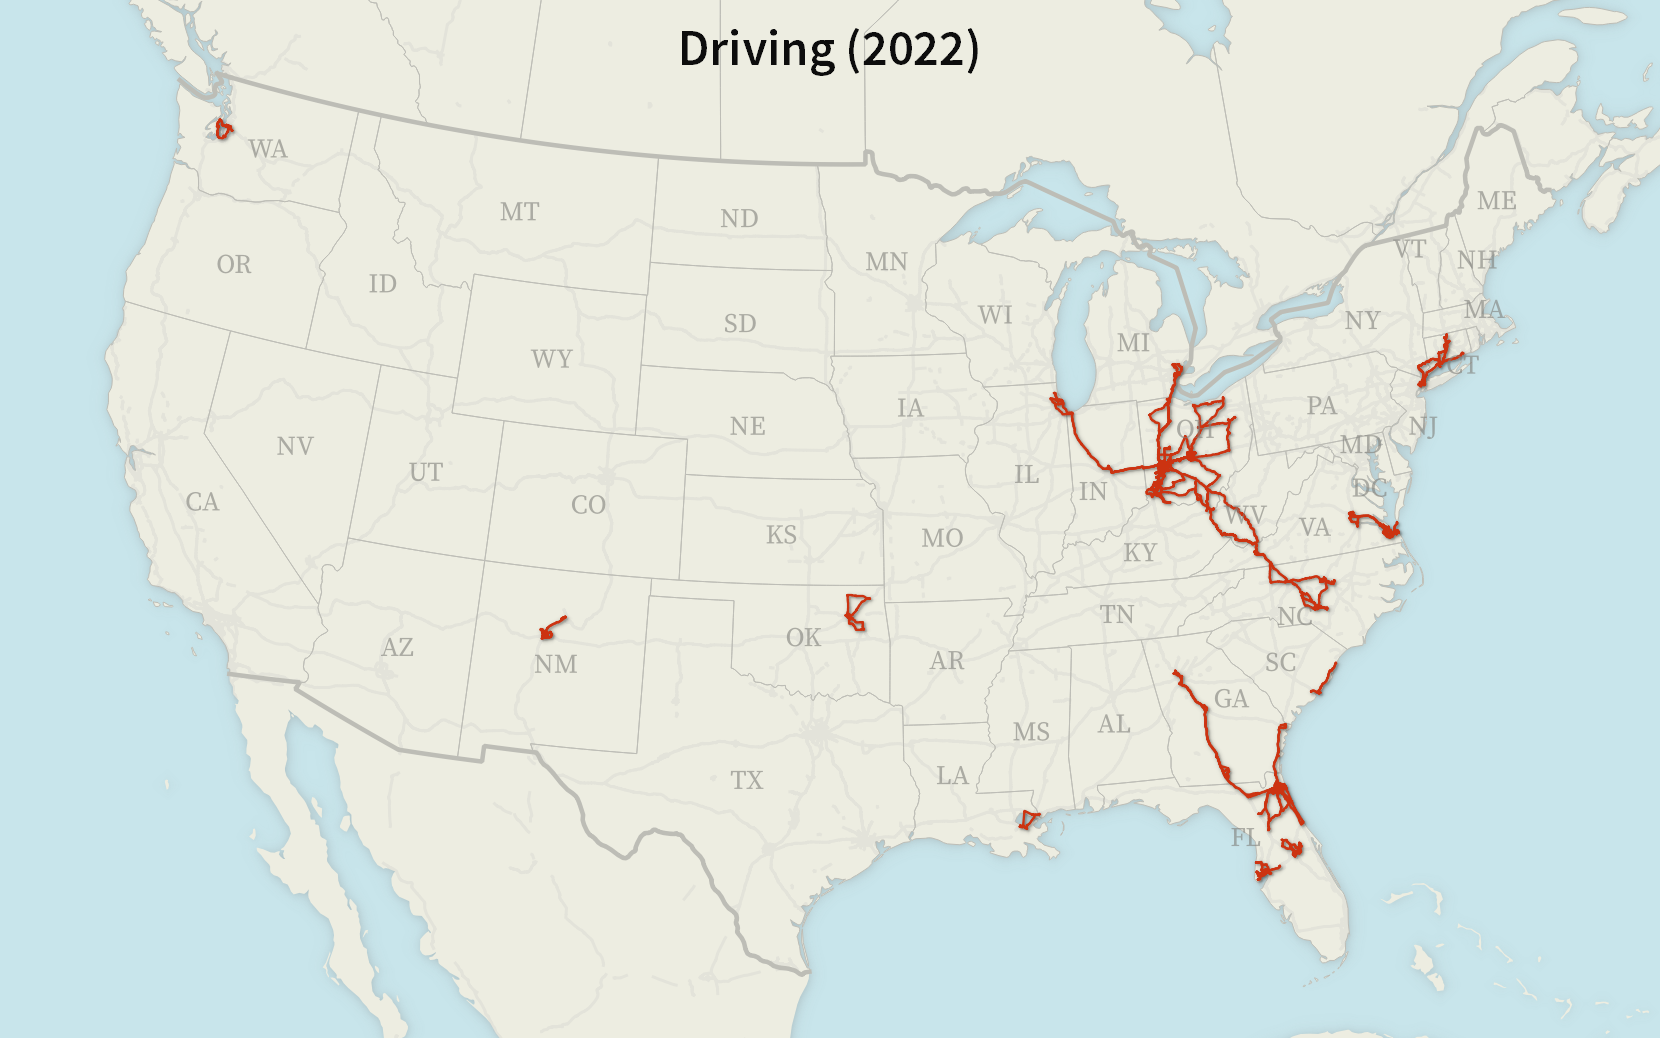 A map of the United States with driving tracks. There is a large cluster of tracks between Chicago, Detroit, and Raleigh; a large cluster of tracks between Atlanta, Savannah, and Jacksonville; and a few other small tracks scattered across the United States.